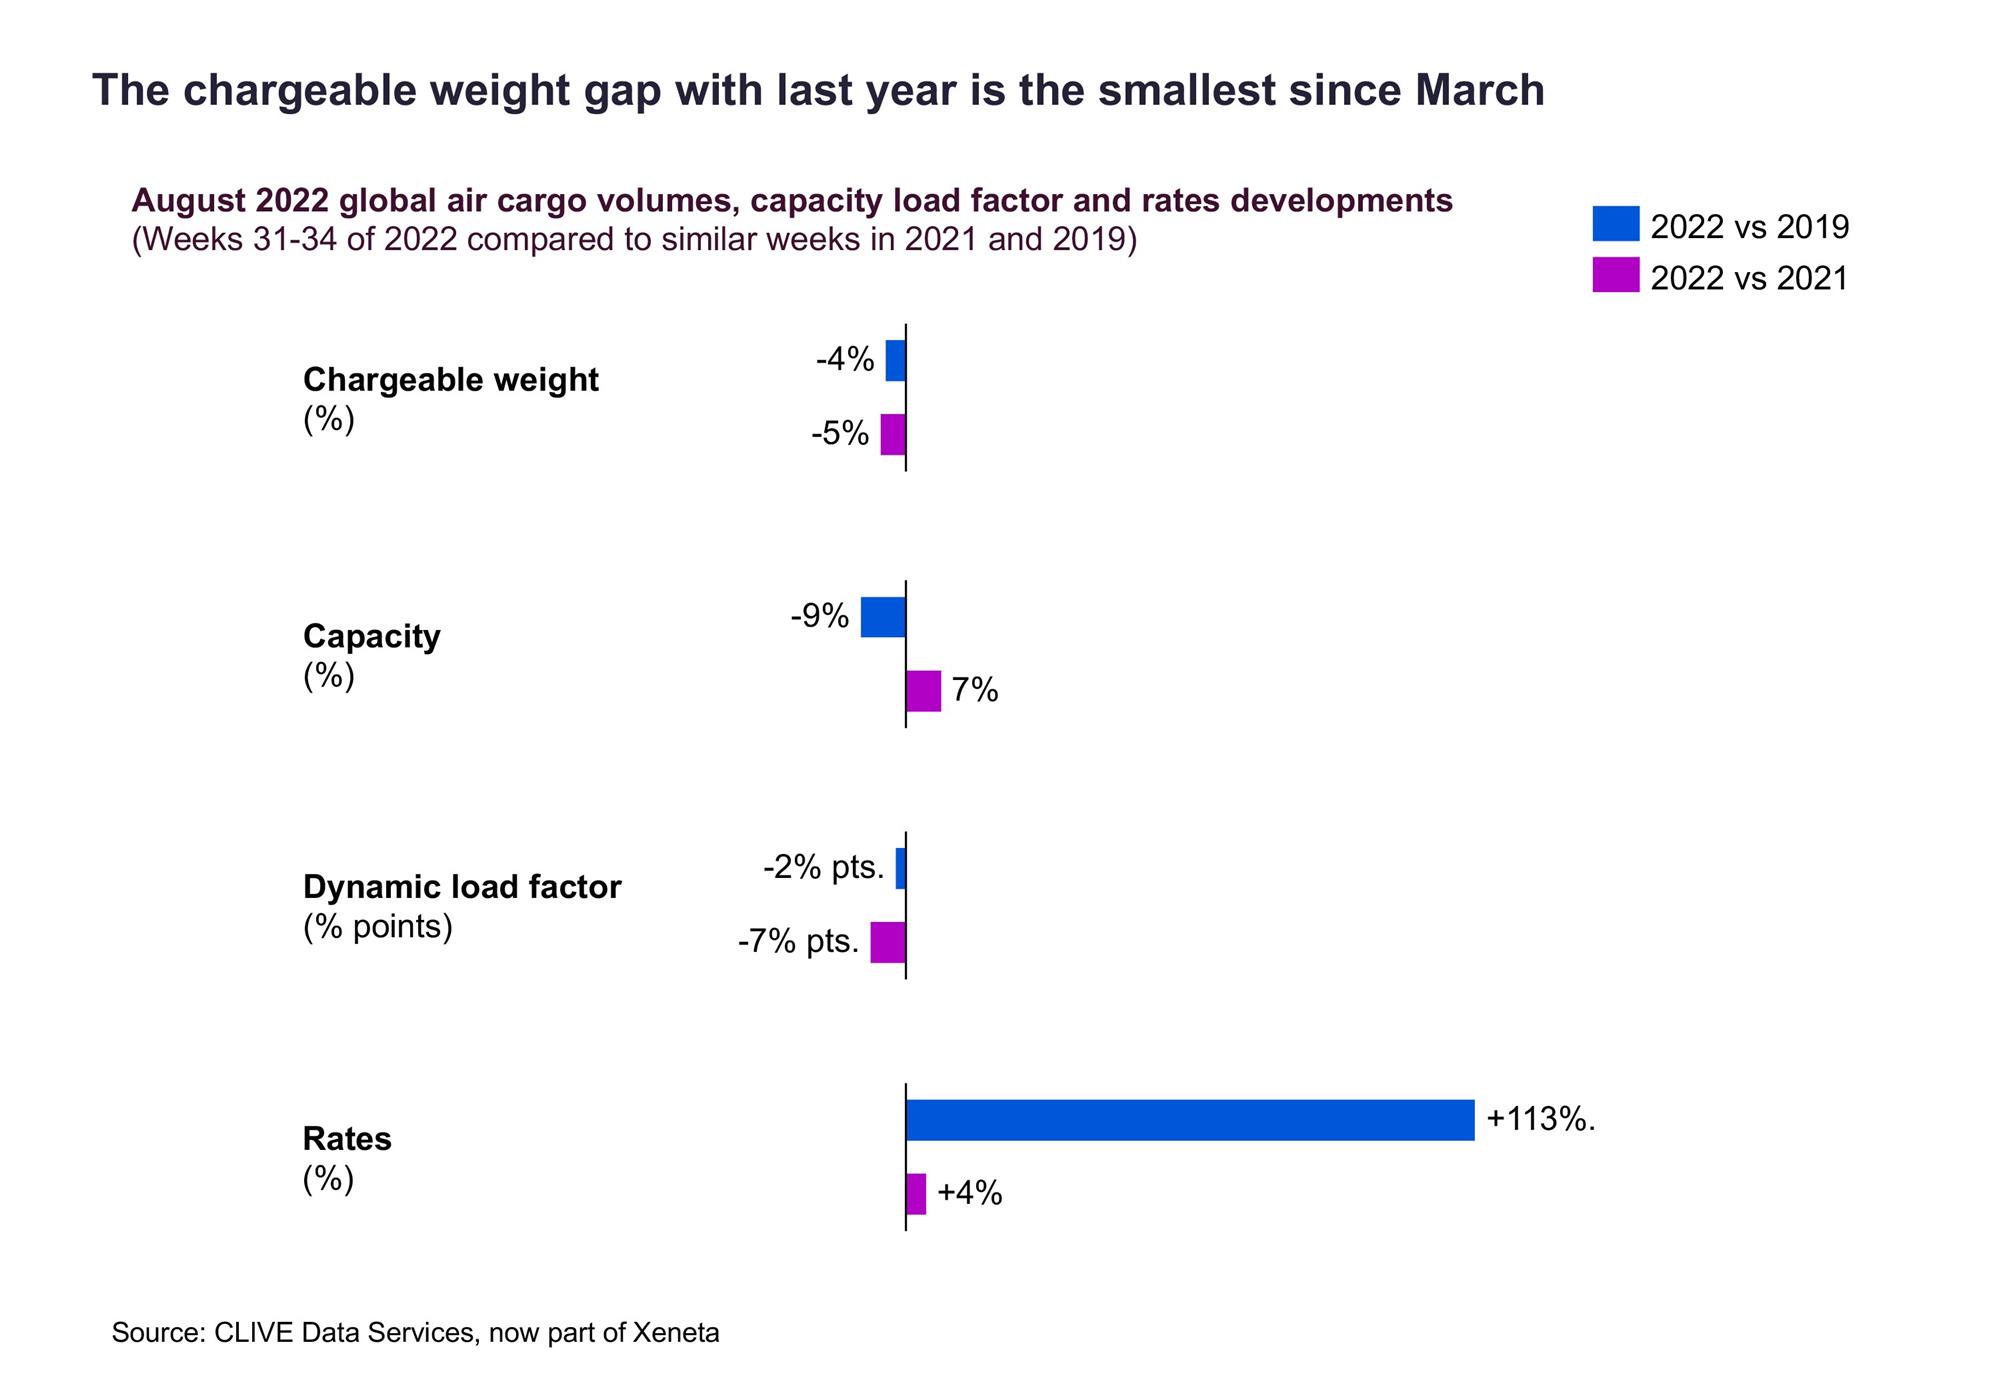 Self Photos / Files - The chargeable weight gap with last year is the smallest since March